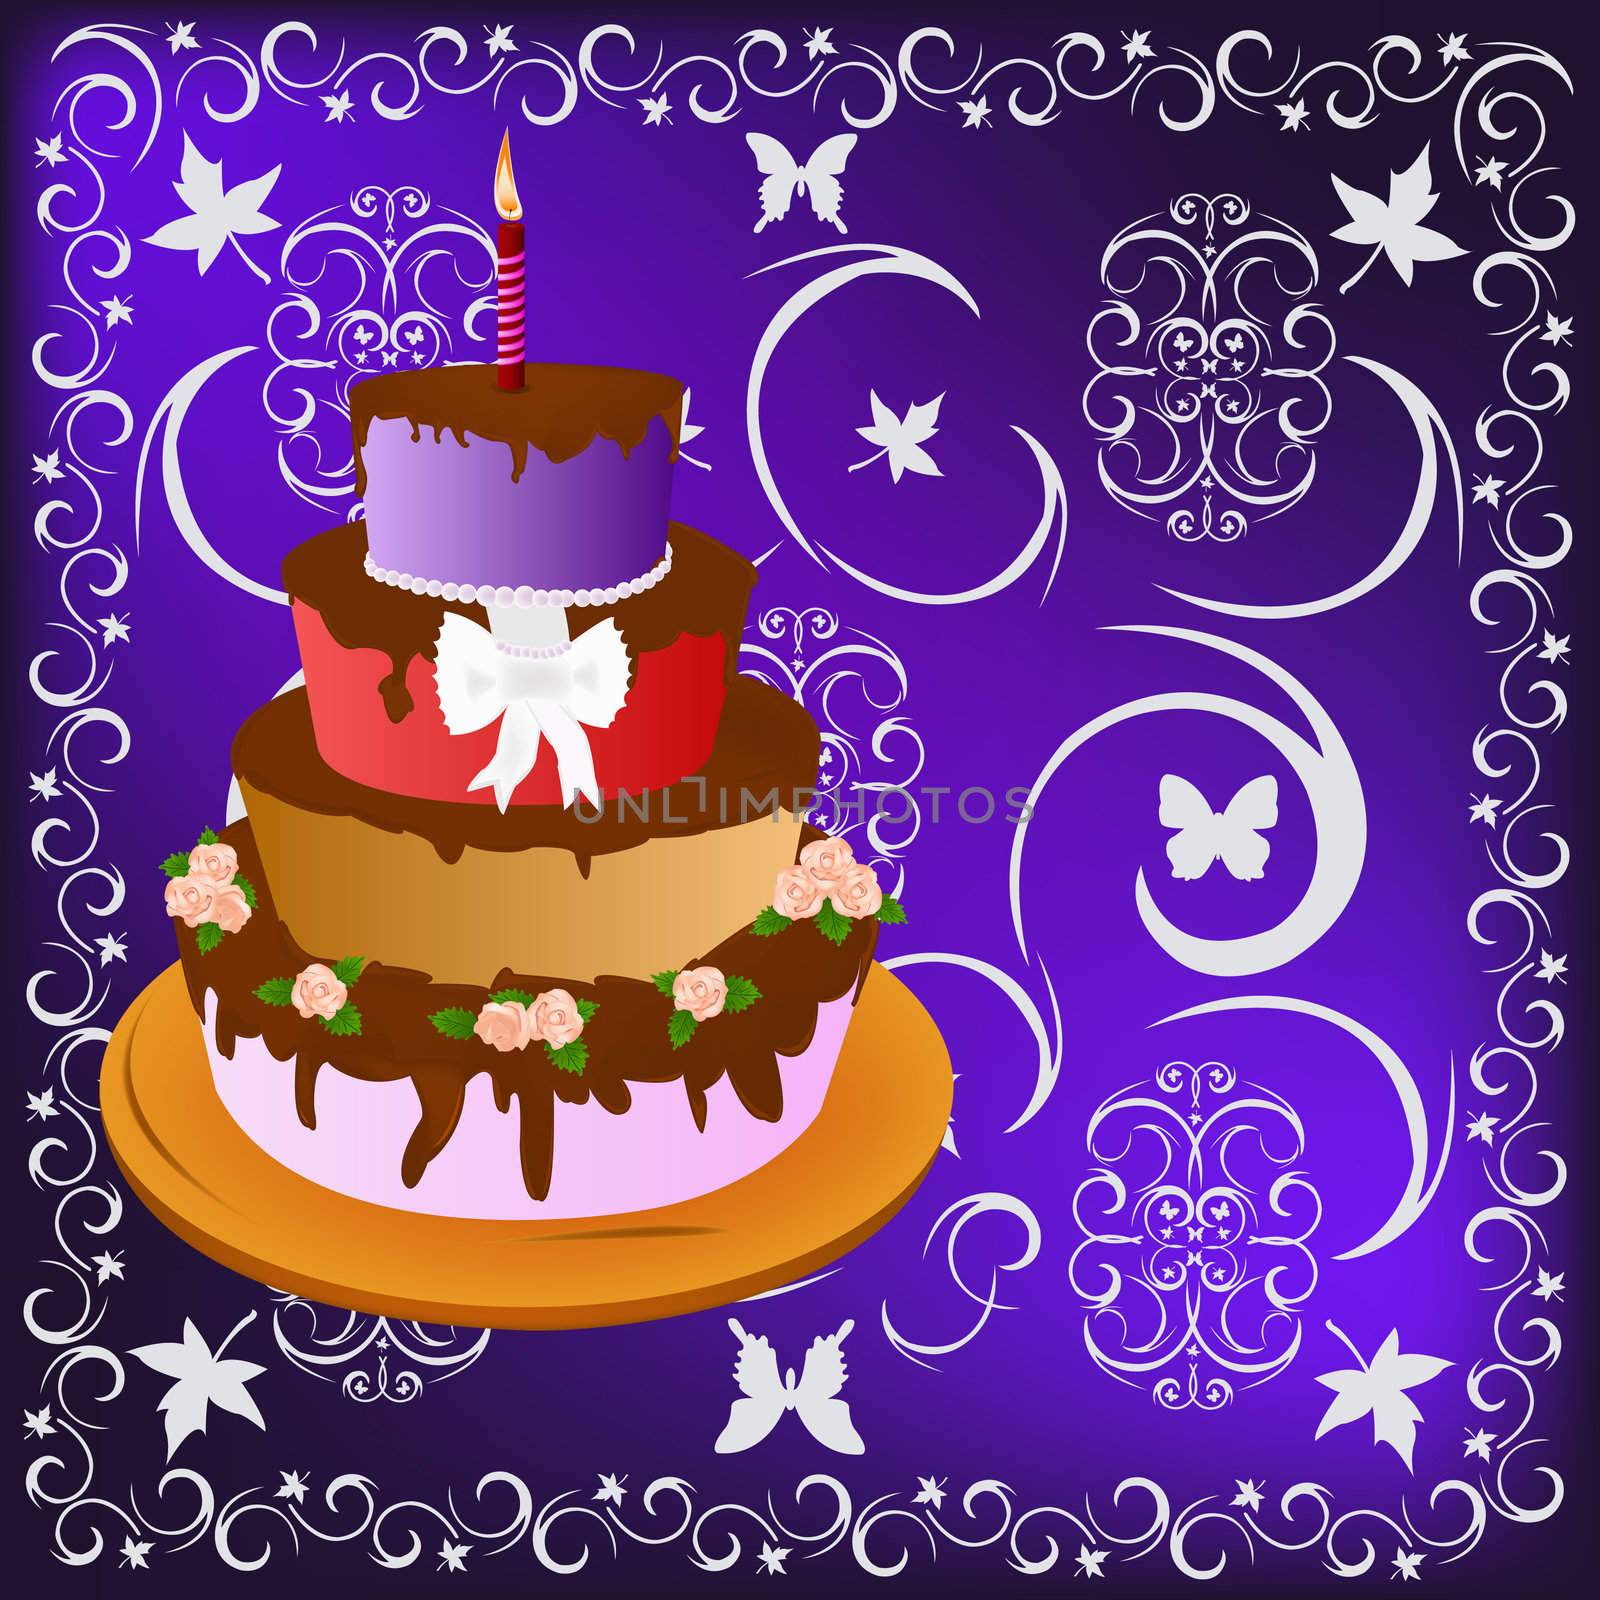 New Year's appetizing celebratory pie on a abstract background with space for placing of your text